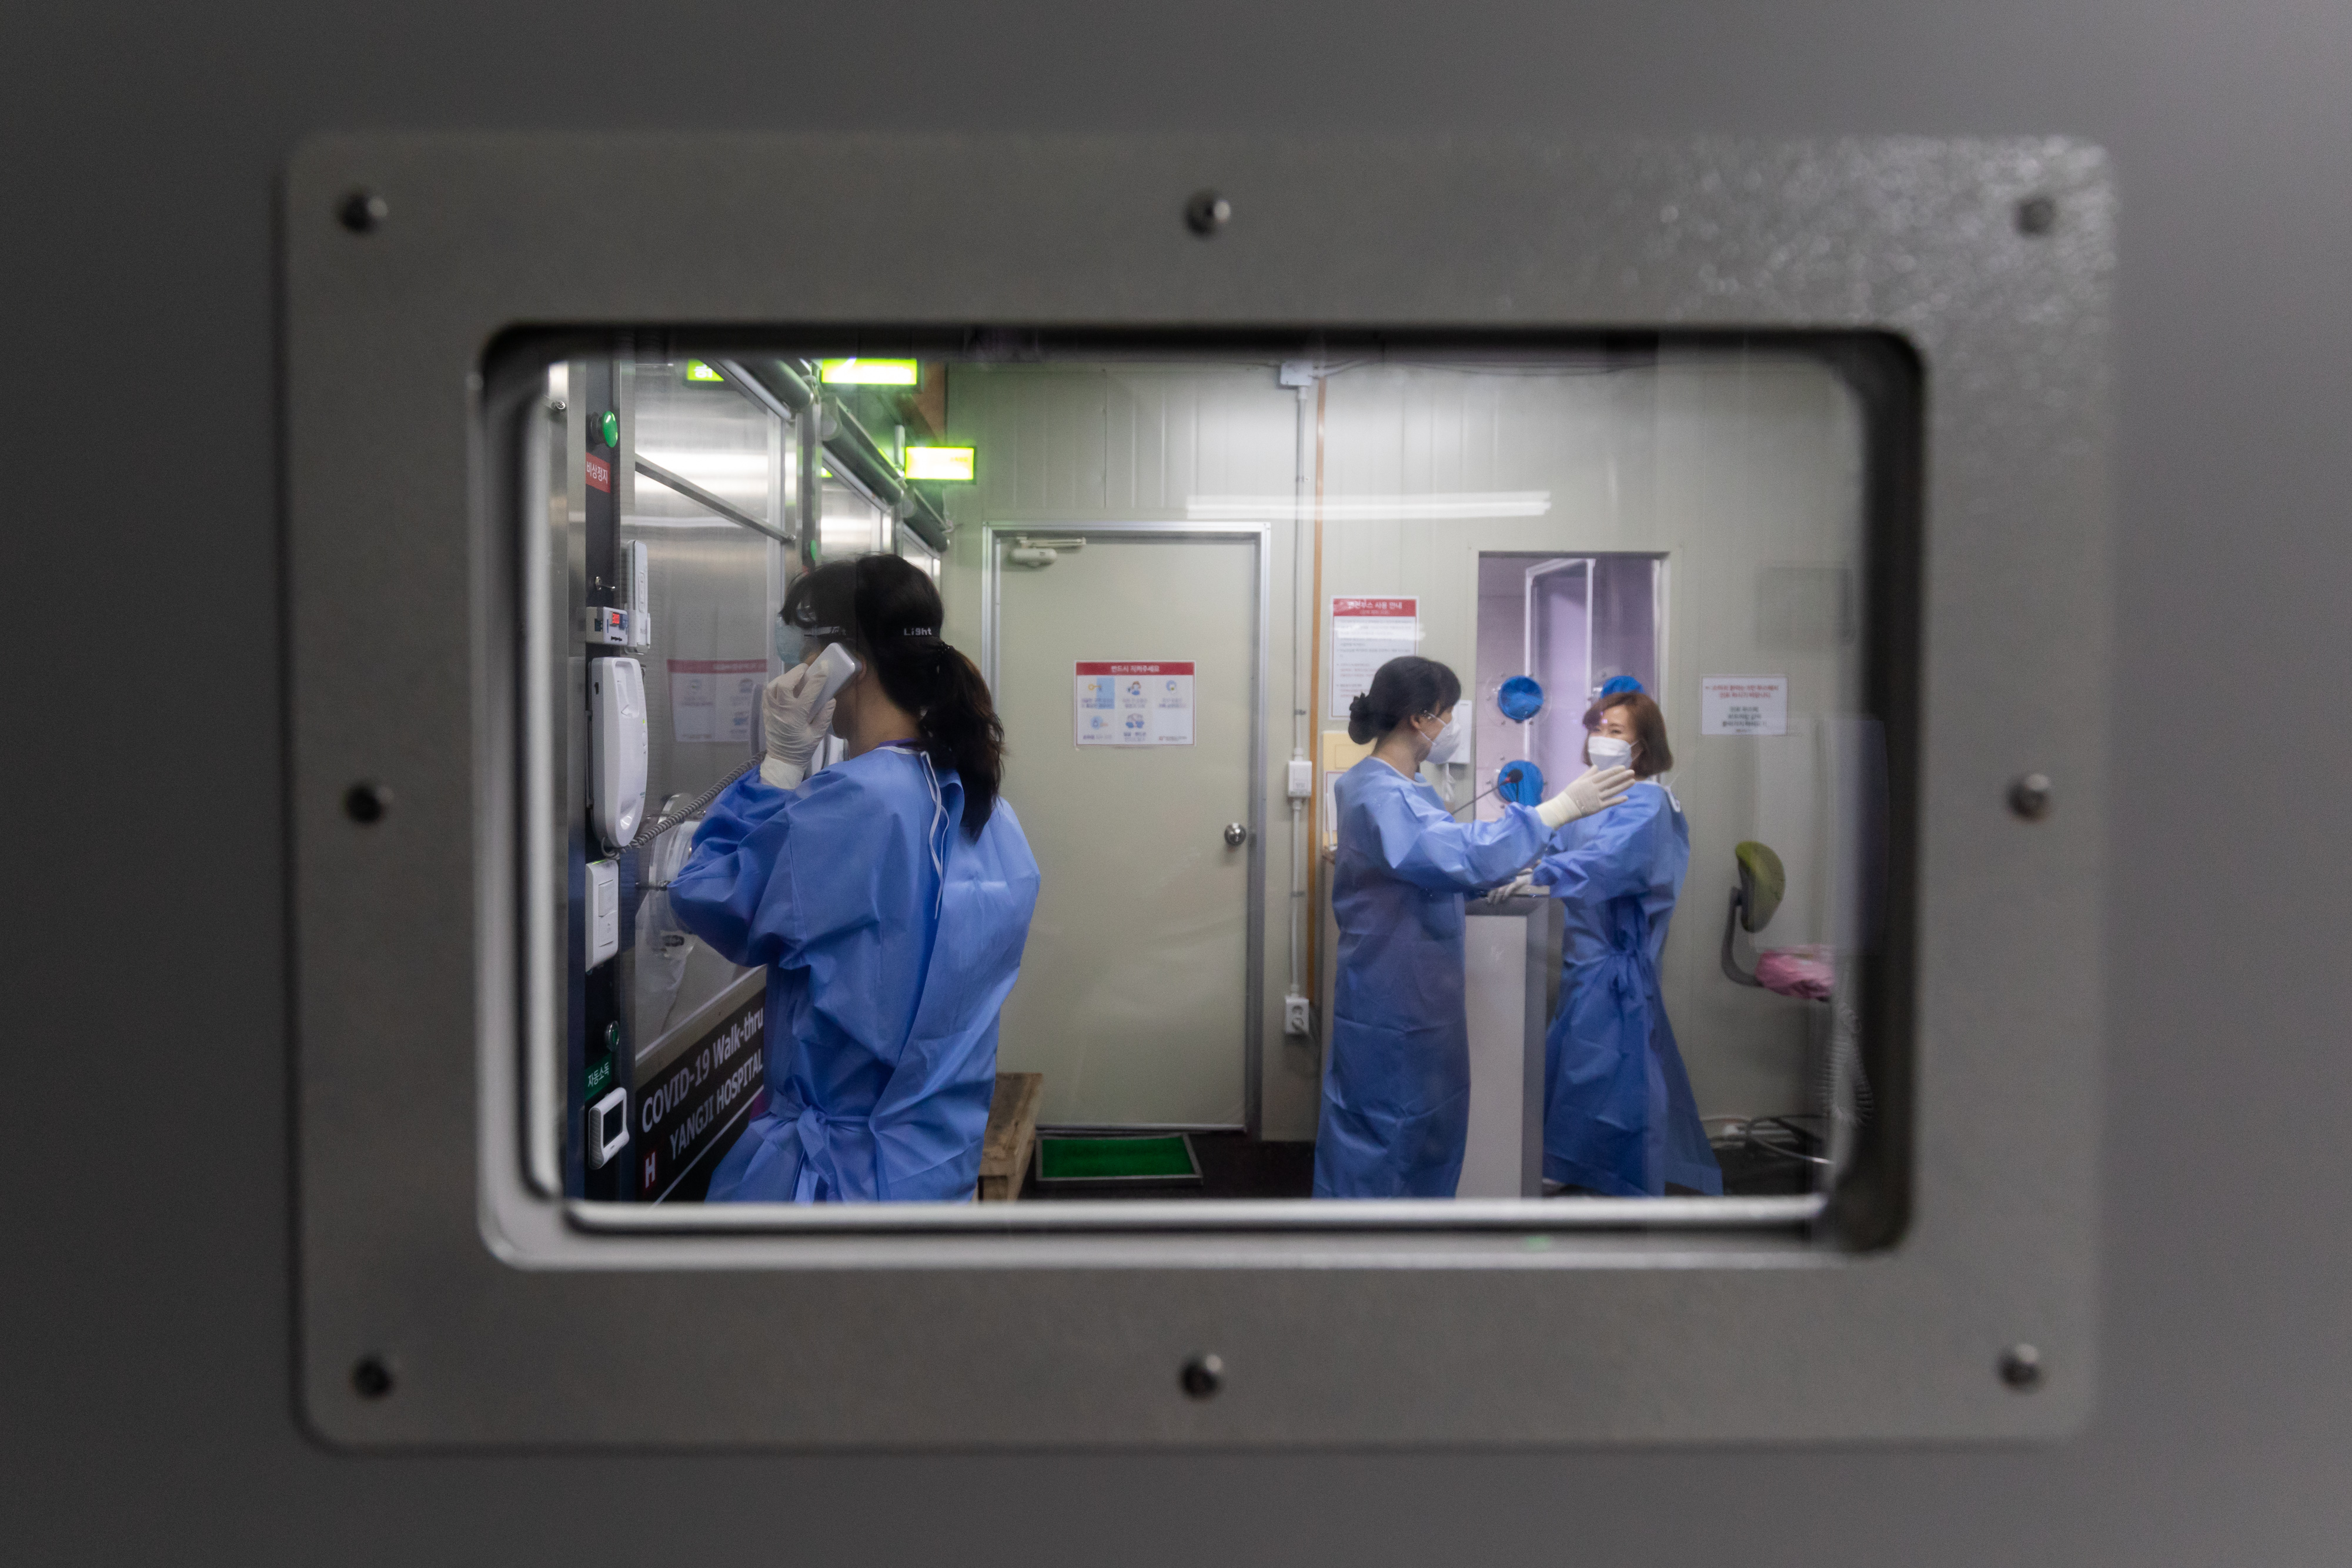 A medical worker wearing personal protective equipment  speaks with a visitor from inside the COVID-19 safety booth in the walk-thru testing center at H Plus Yangji Hospital in Seoul, South Korea on July 24, 2020. (SeongJoon Cho—Bloomberg/Getty Images)